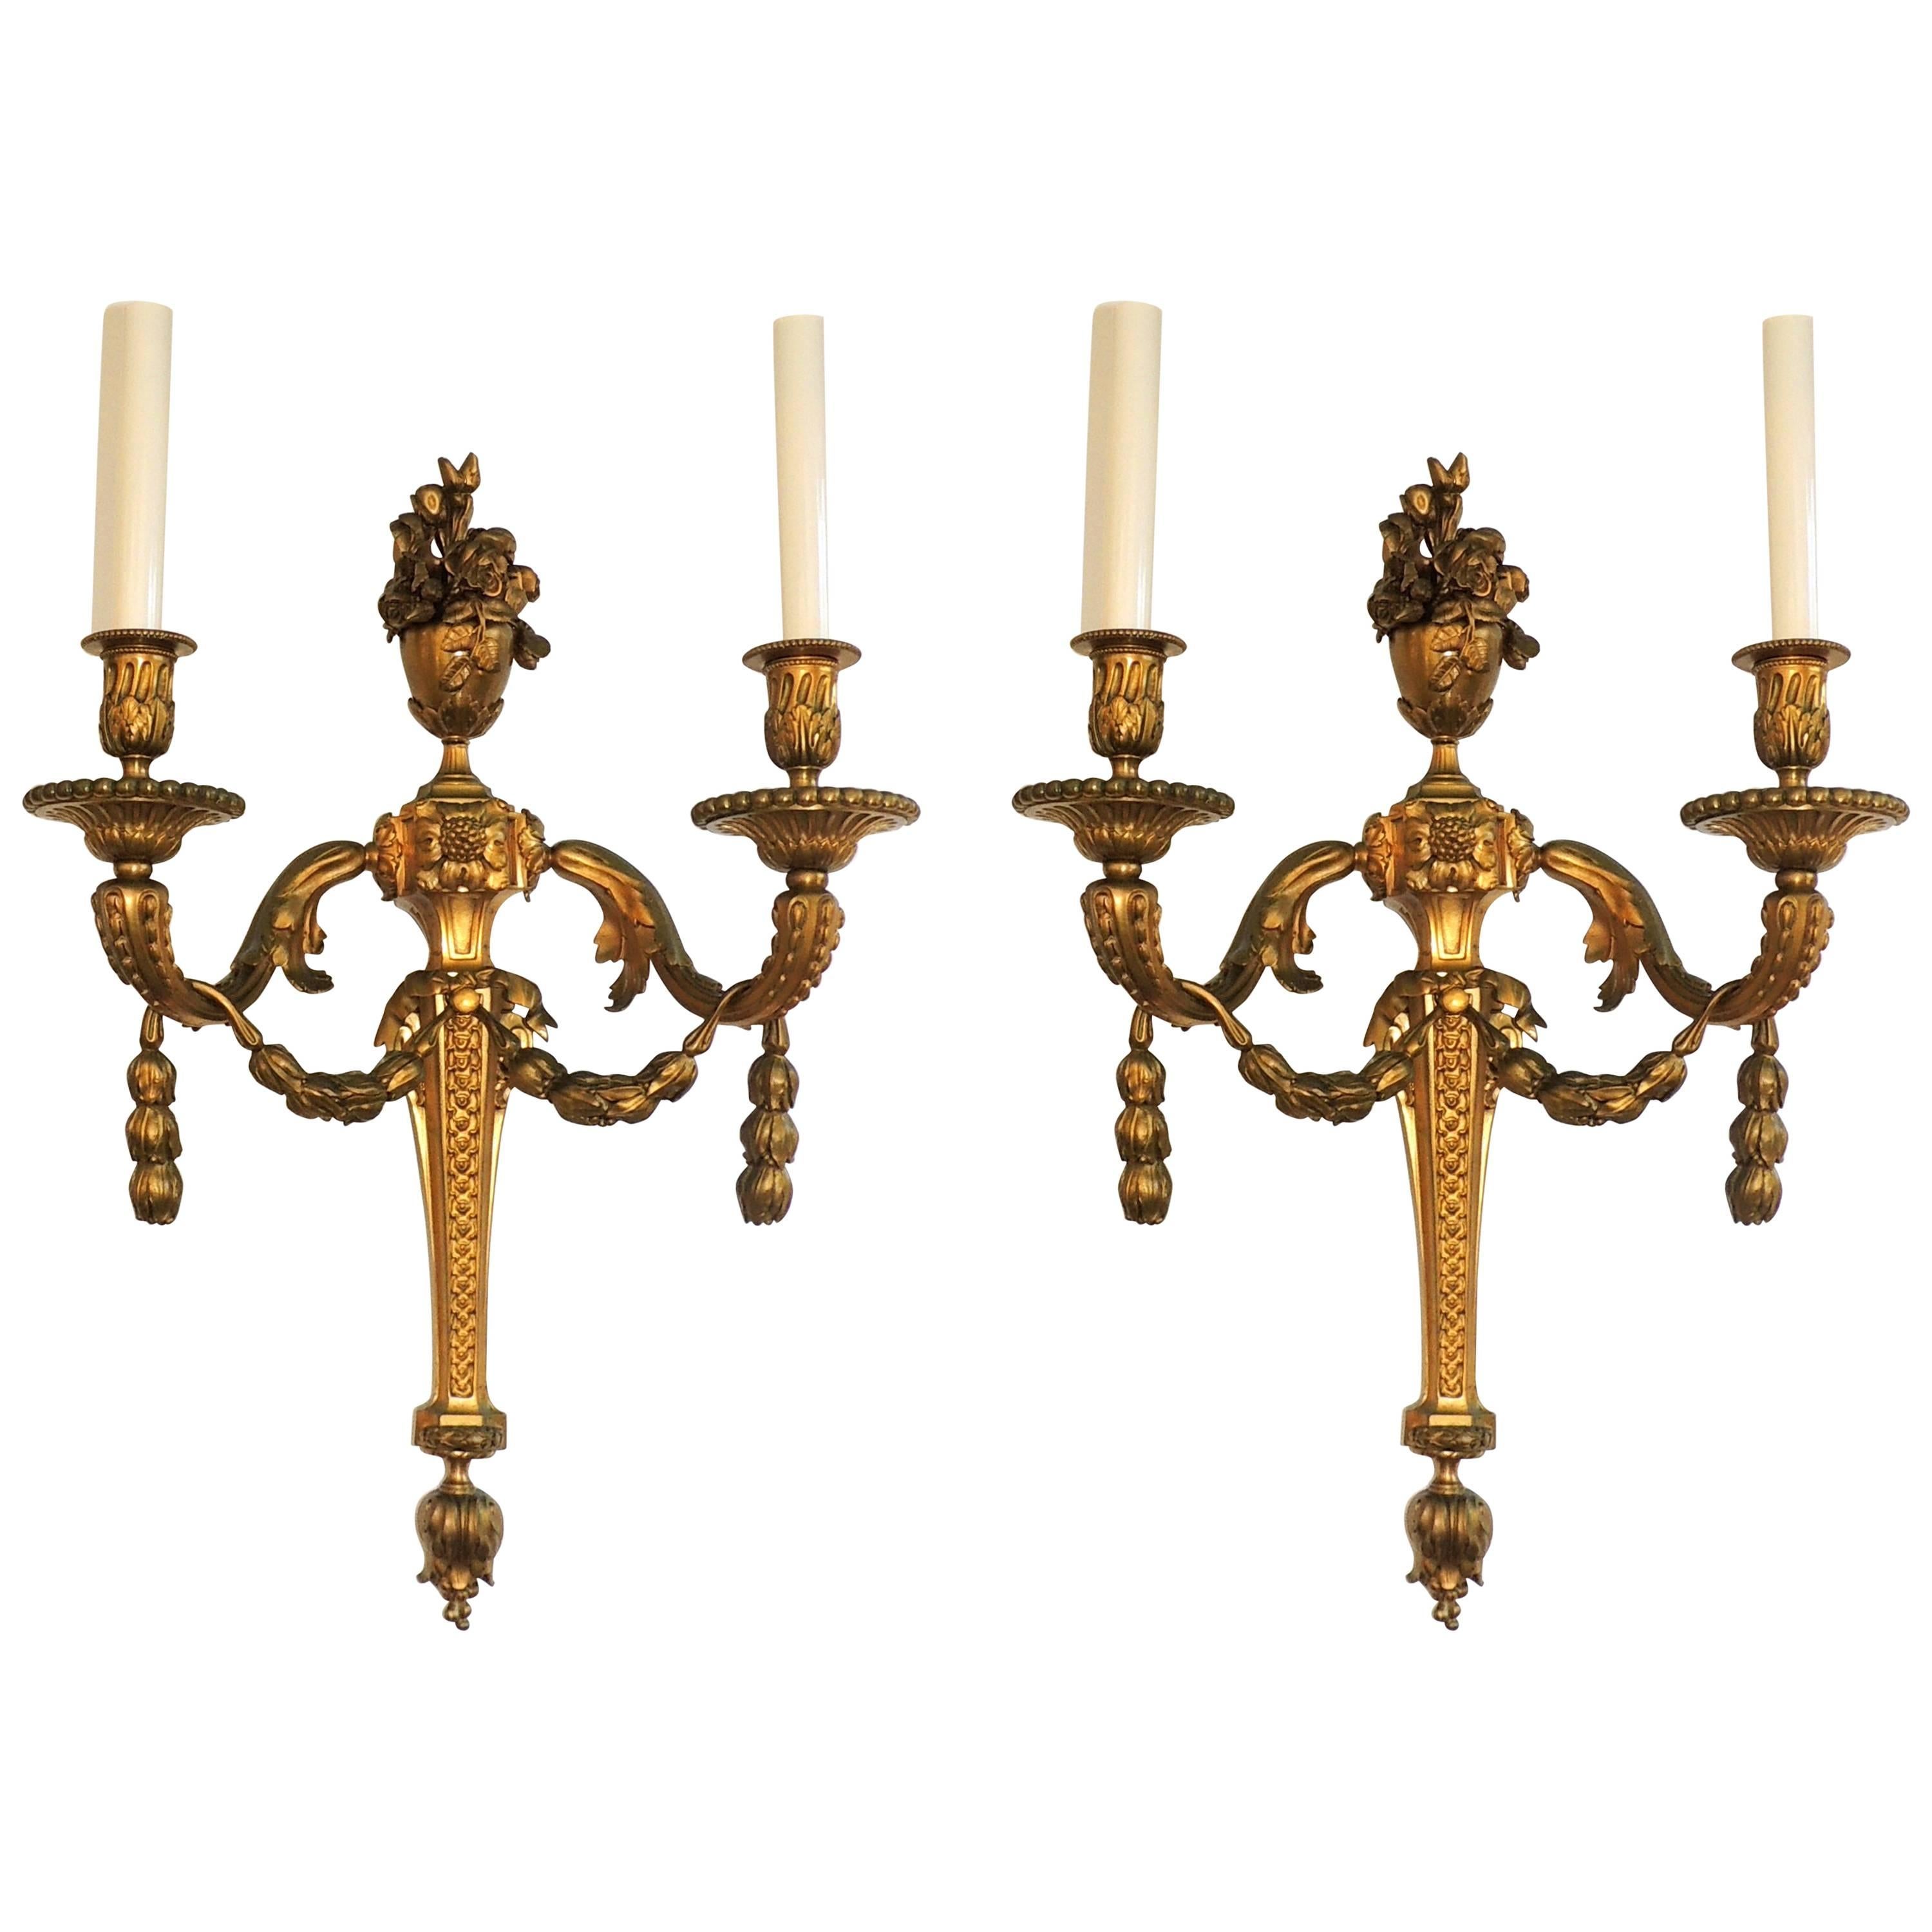 Wonderful French Pair Two-Arm Gilt Dore Bronze Urn Floral Garland Swag Sconces